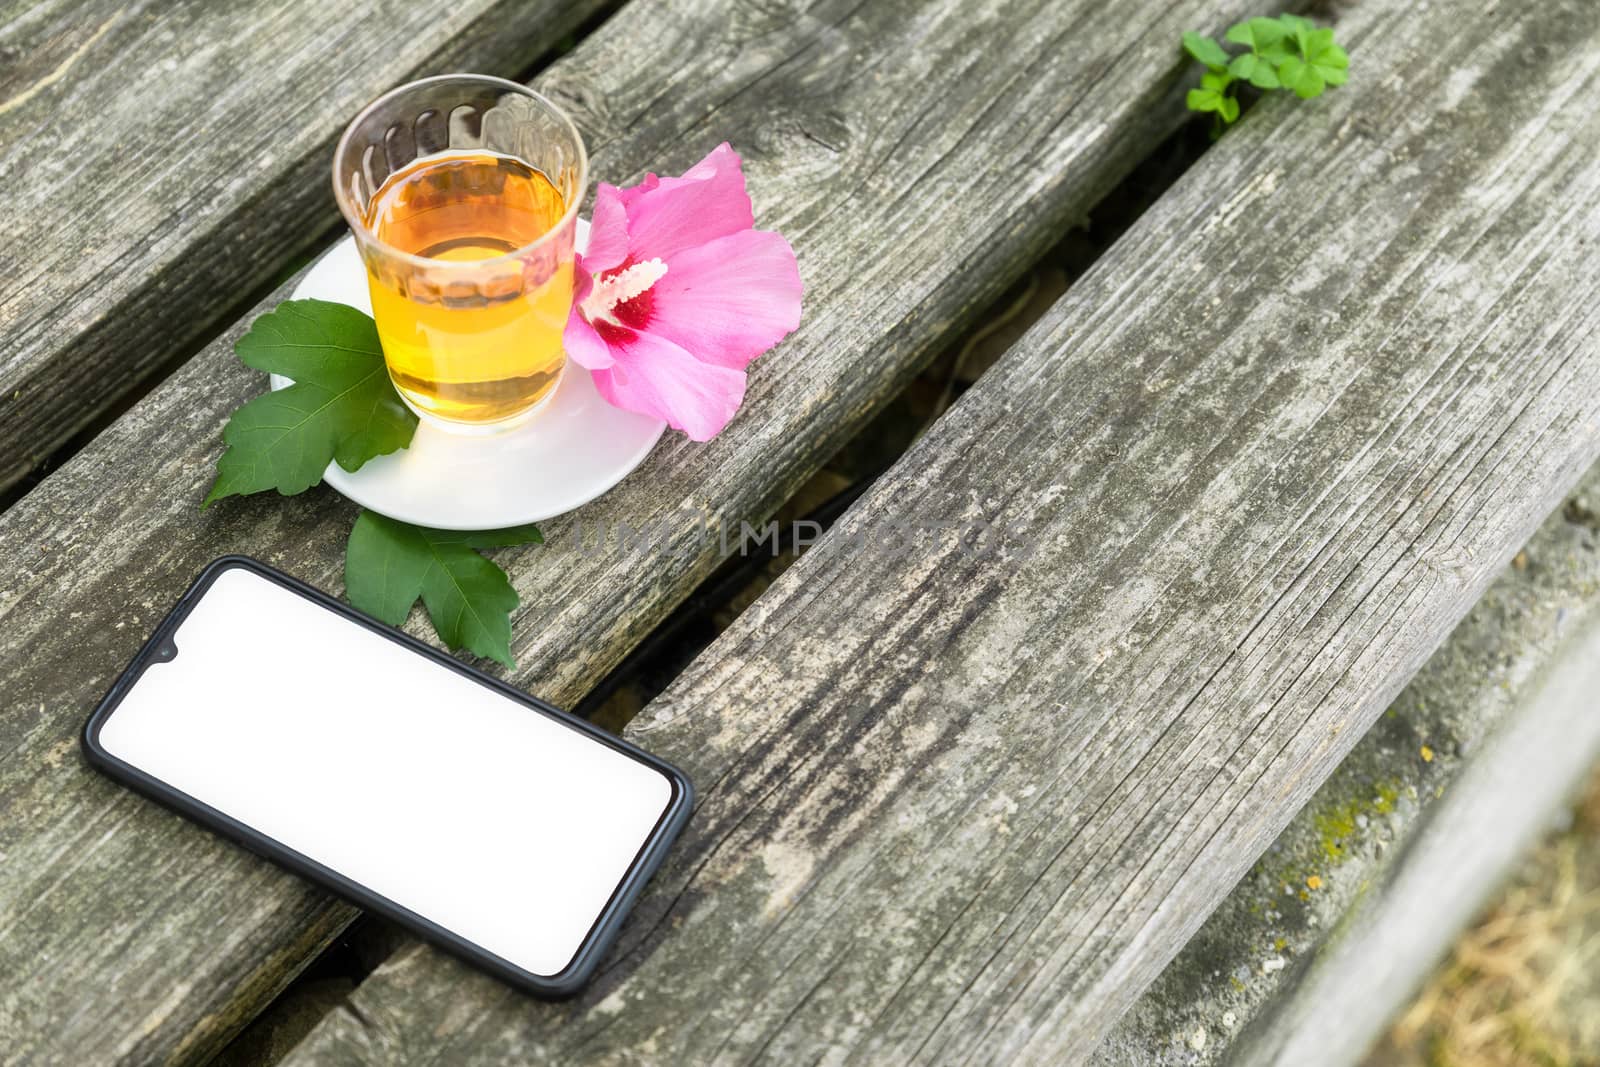 A mallow tea in a glass with smartphone on old wooden background